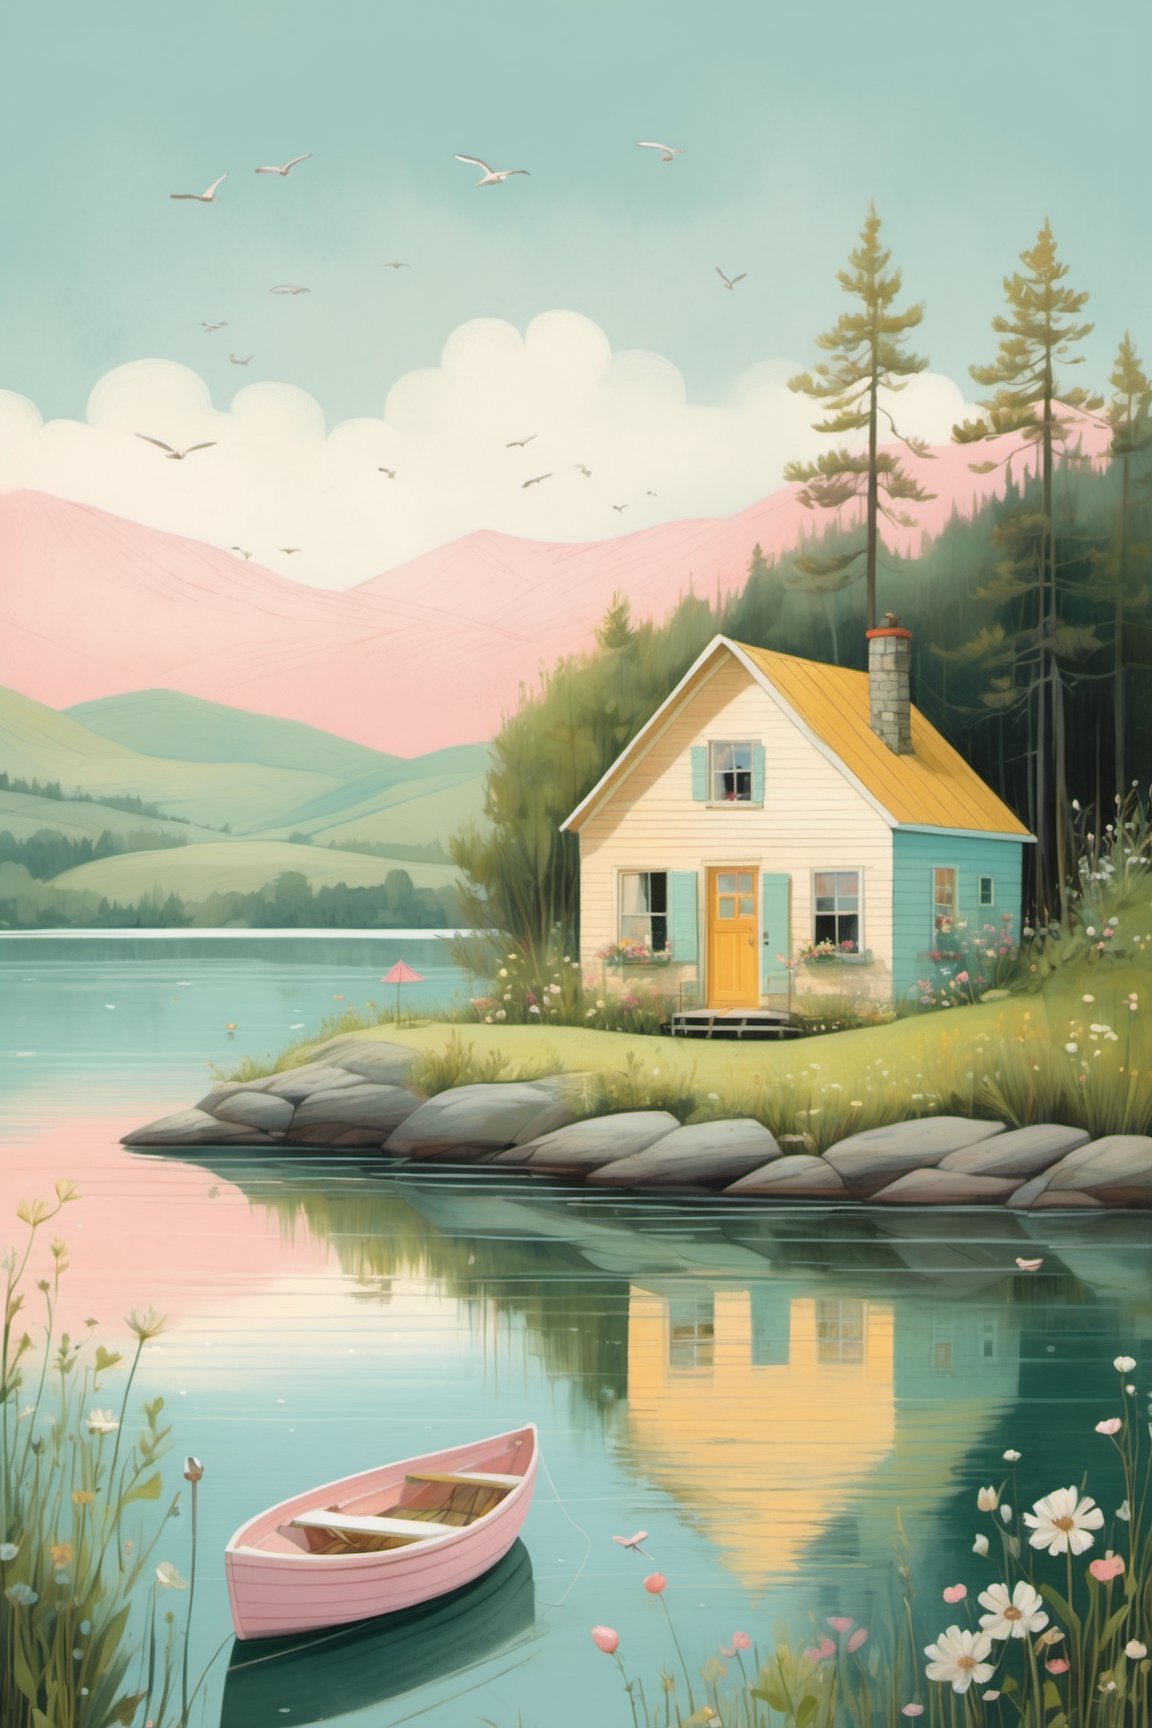 summer at the lake, perfect detailing, natural morning light

intricate details, mellow, pastel hues, romantic, shabby-chic, artwork by oliver jeffers, jane newland   